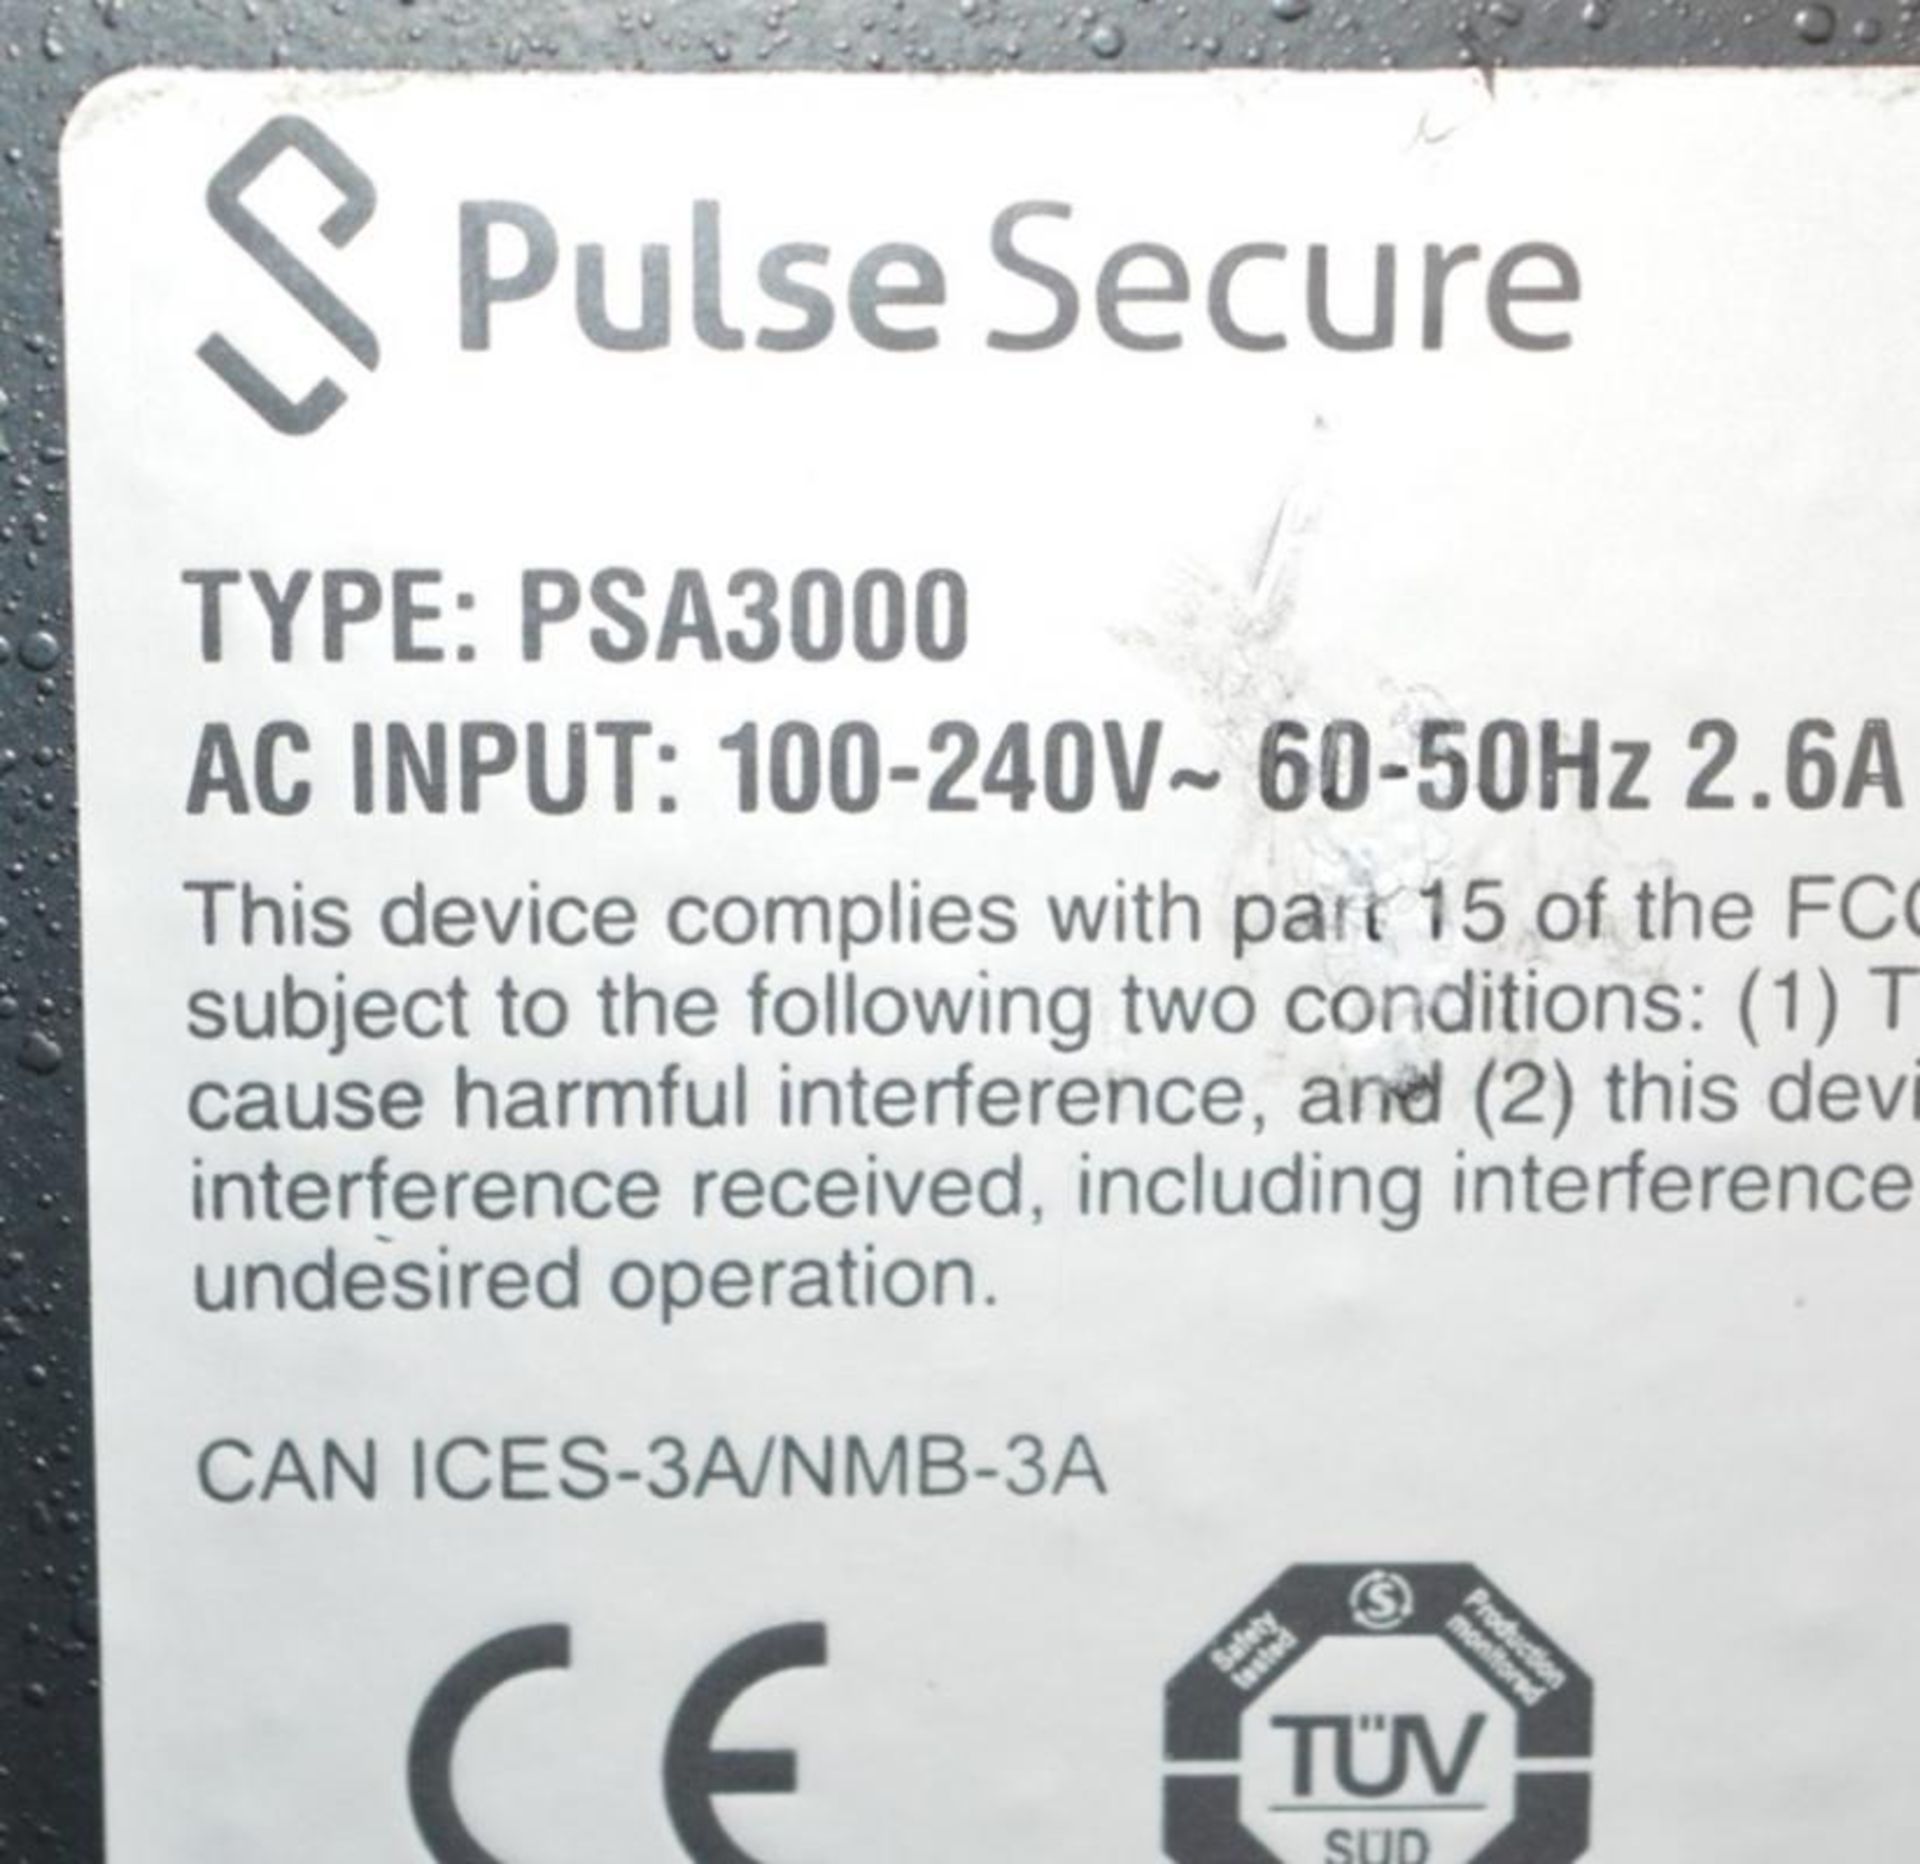 1 x Pulse Secure PSA3000 Security Appliance - CL285 - Ref JP327 F2 - Location: Altrincham WA14 - RRP - Image 3 of 5